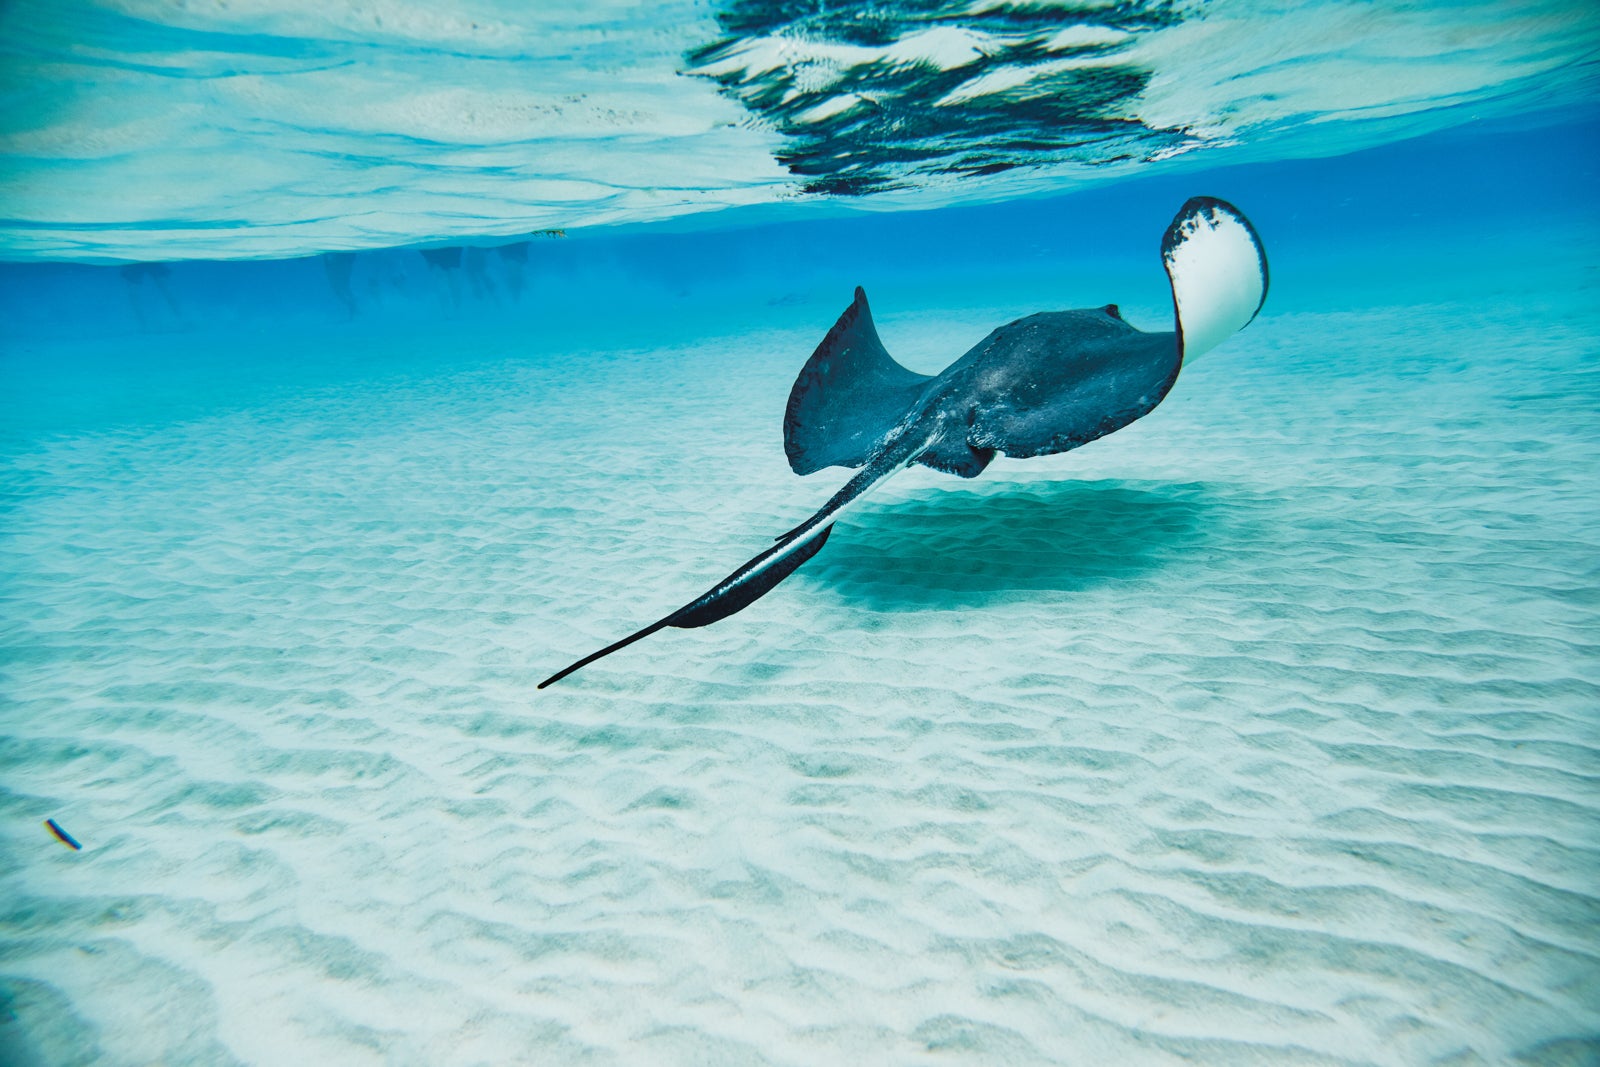 Stingray swimming beneath the waters of Grand Cayman